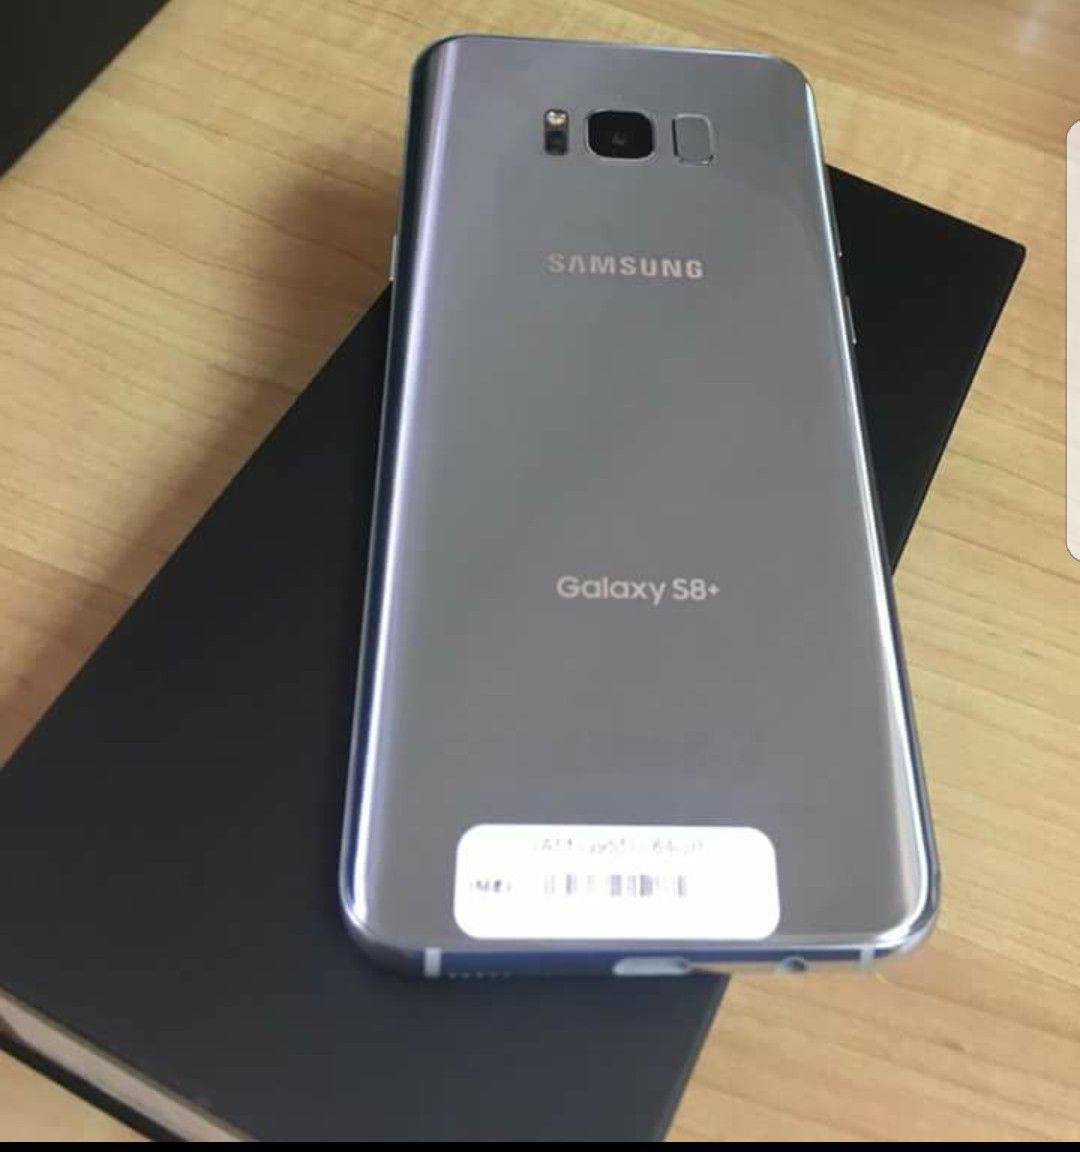 Samsung Galaxy S8 Plus 64GB. Factory Unlocked and Usable with Any Company Carrier SIM Any Country